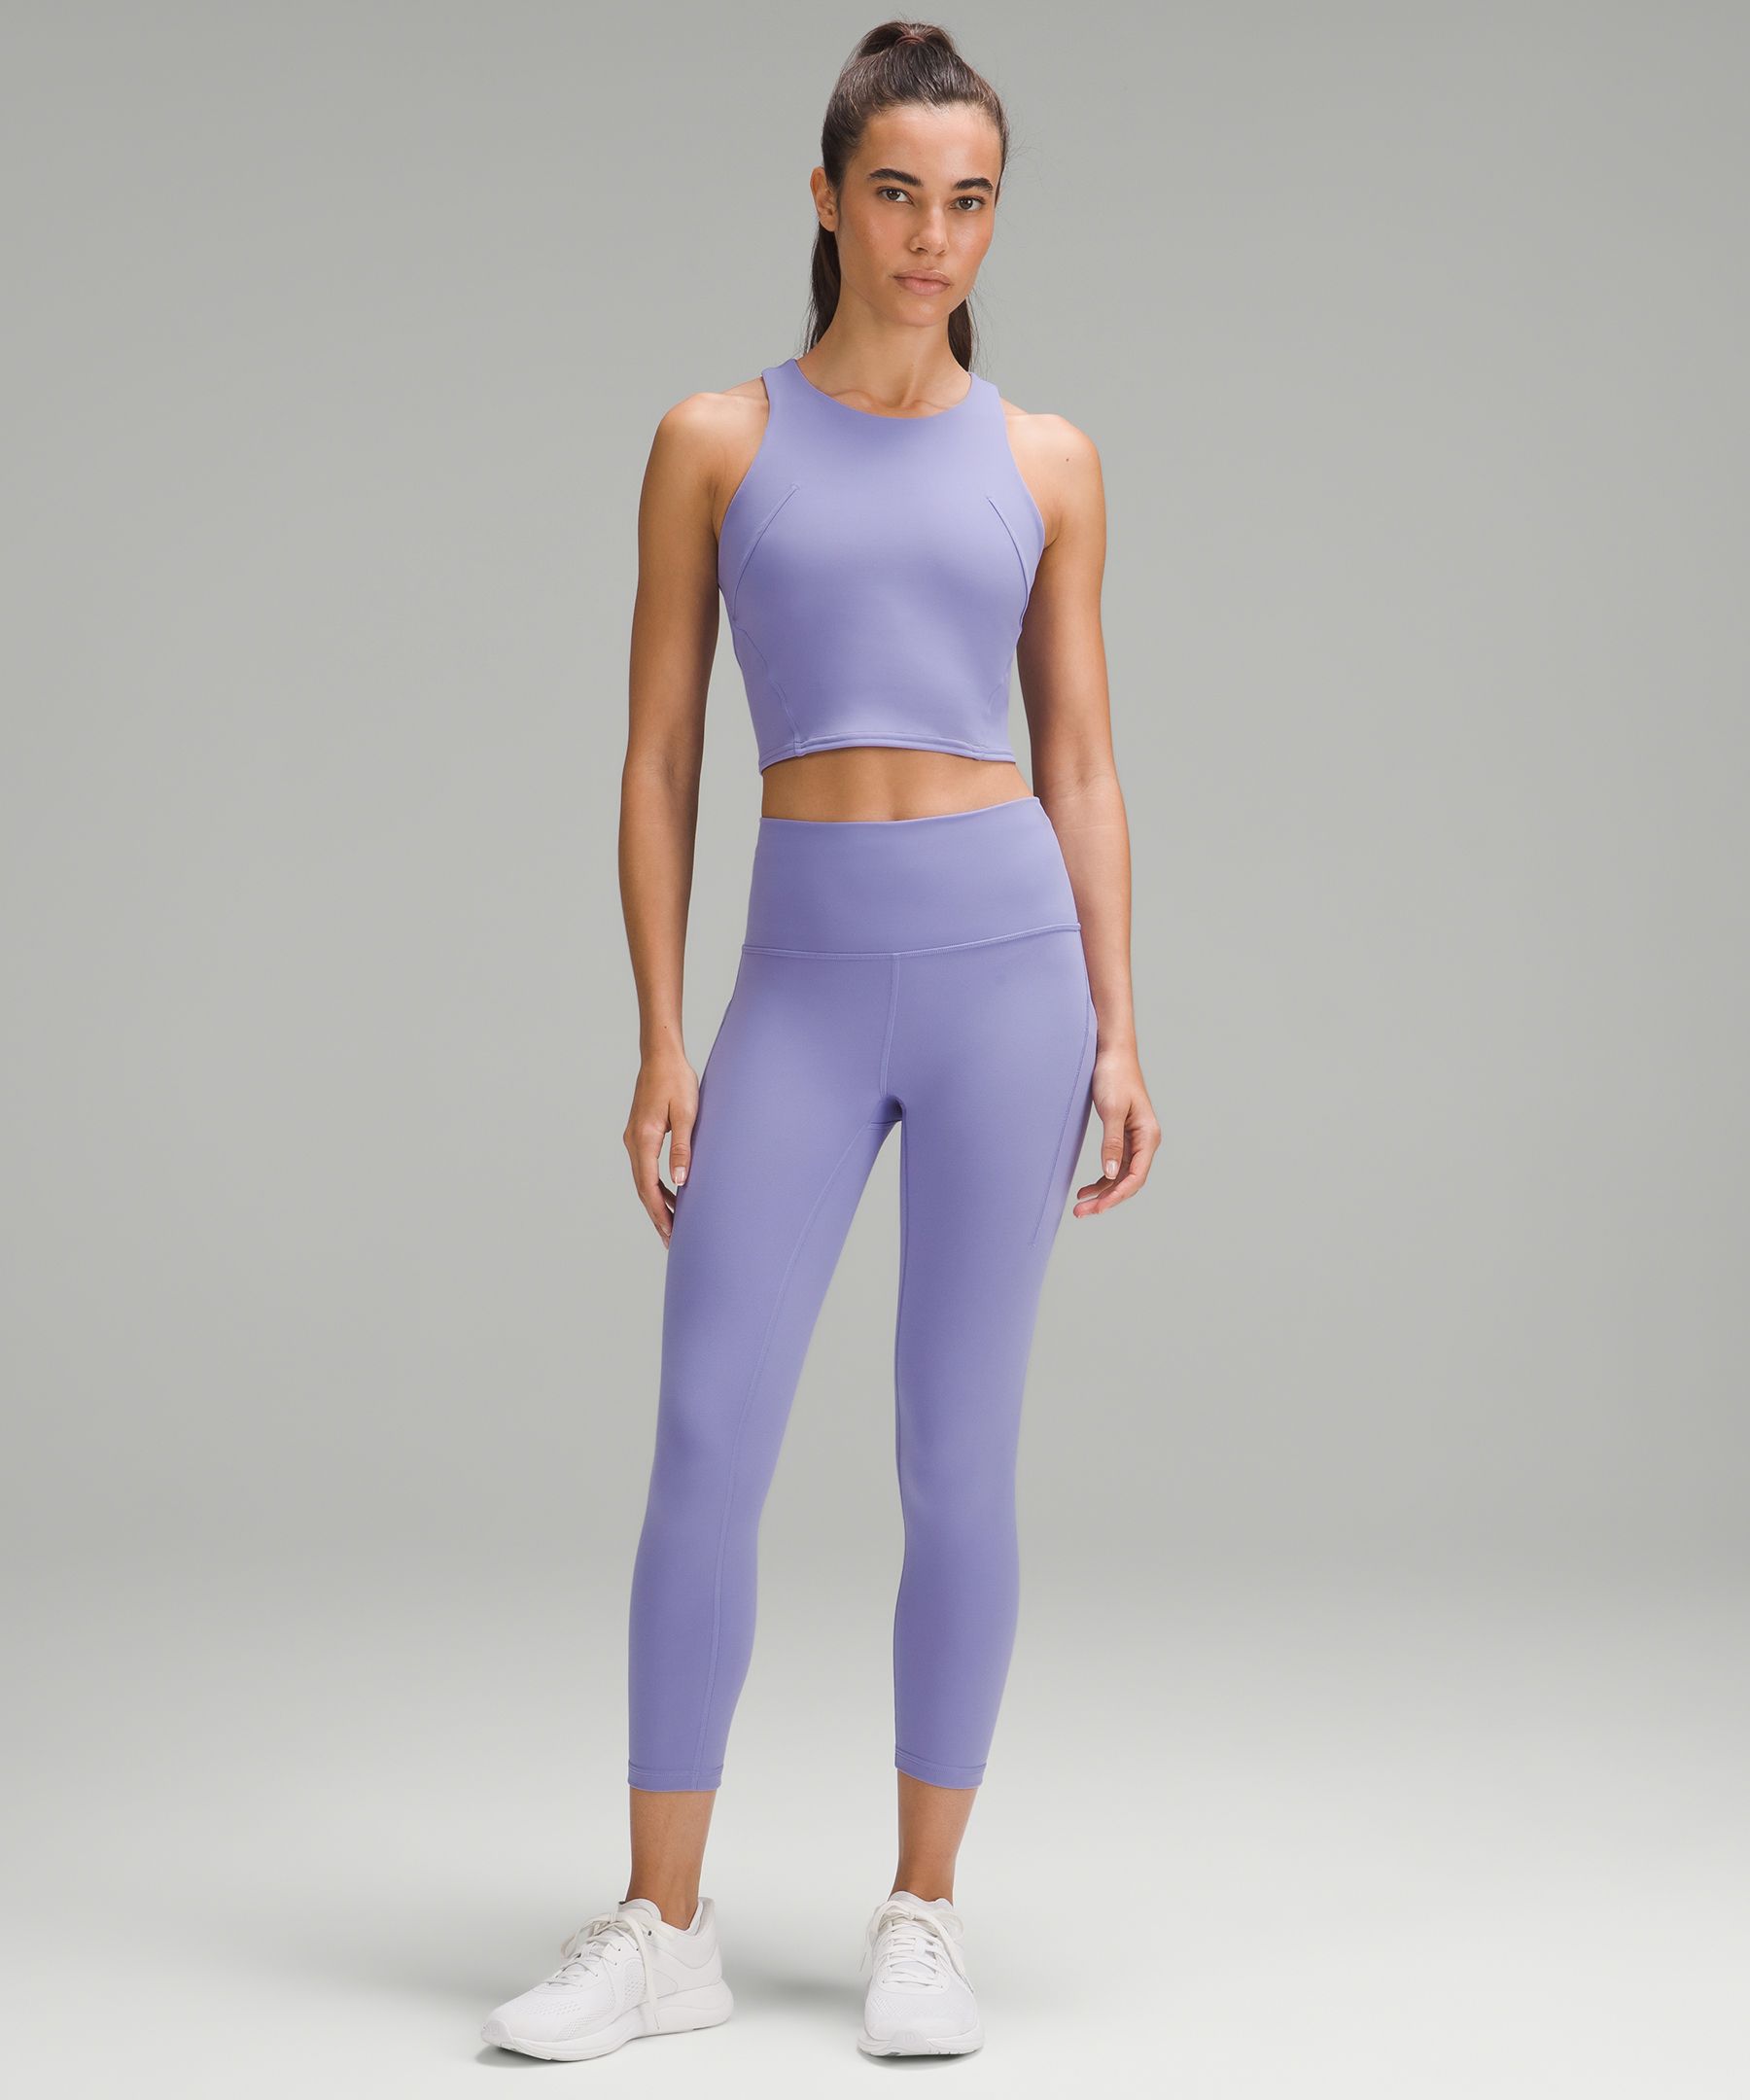 Lululemon Wunder Train High-Rise Crop with Pockets 23" *Online Only. 2